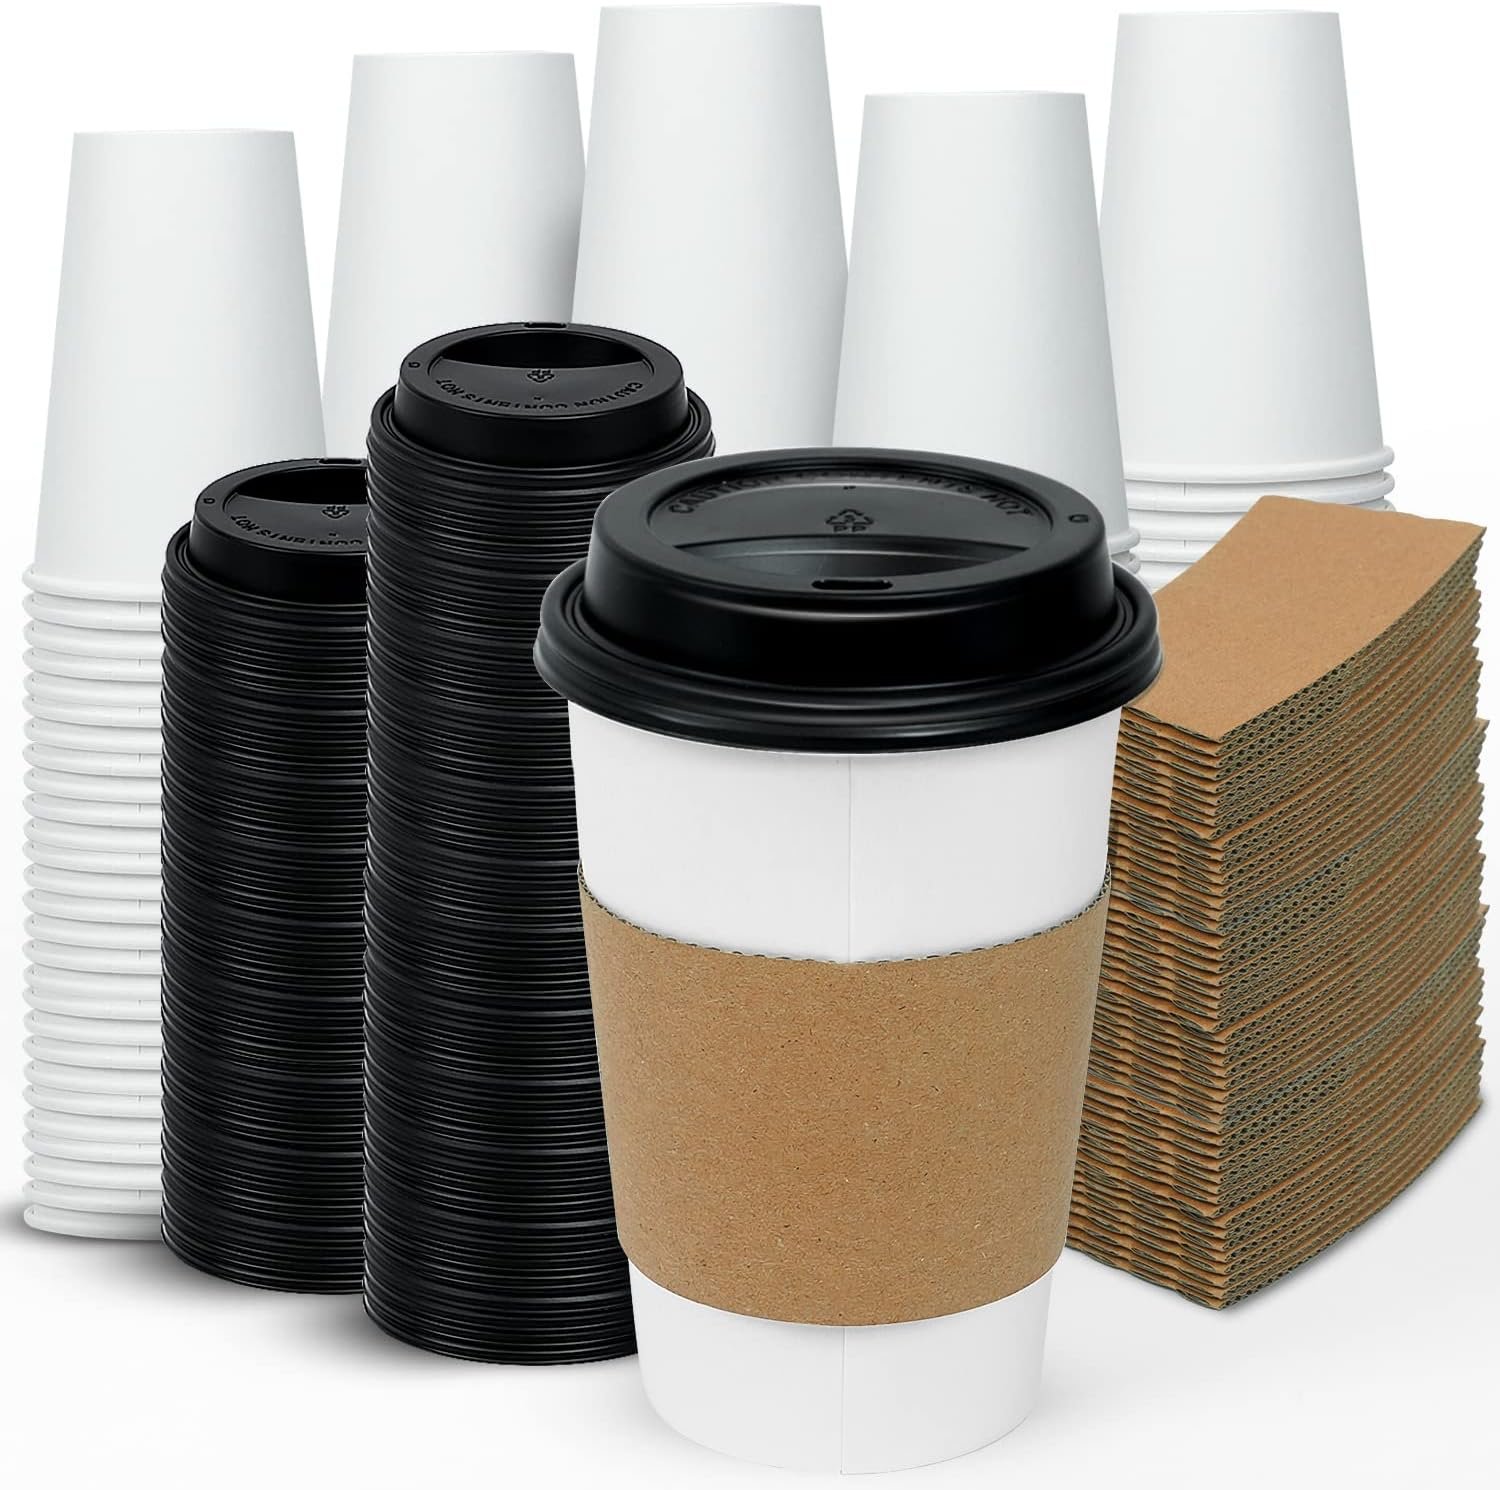 Ginkgo 16 oz Disposable Coffee Cups Review